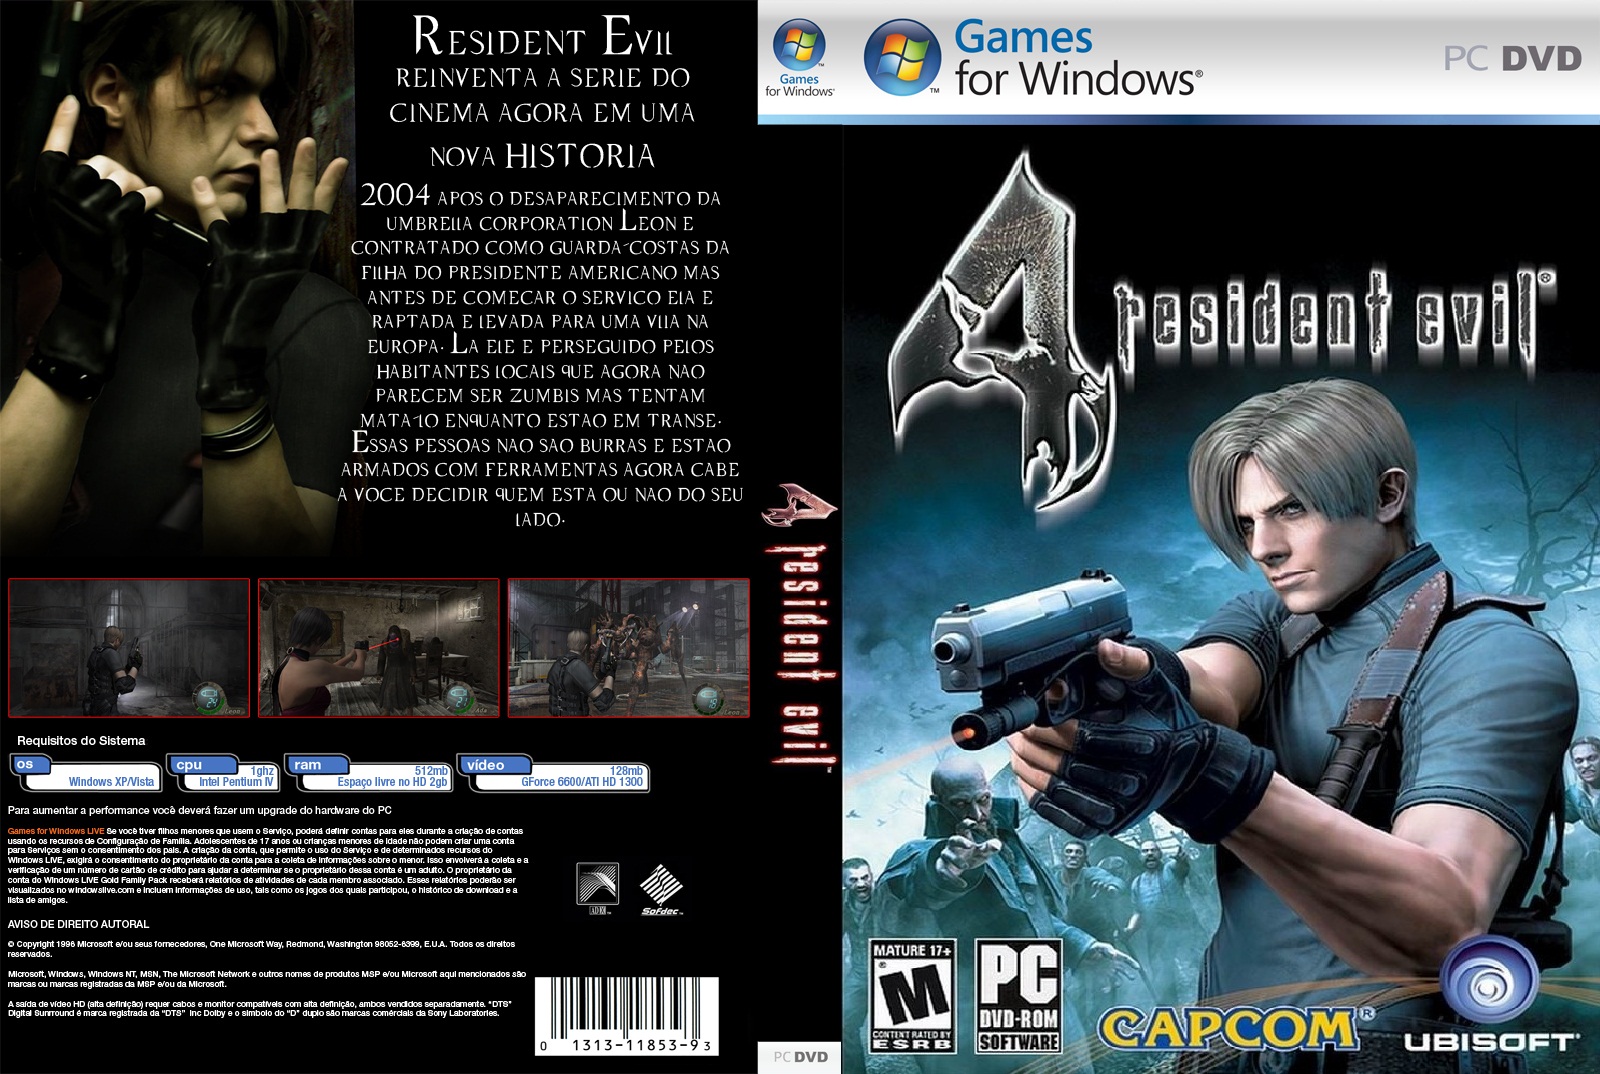 Resident evil 4 for pc how to download and play in pc.